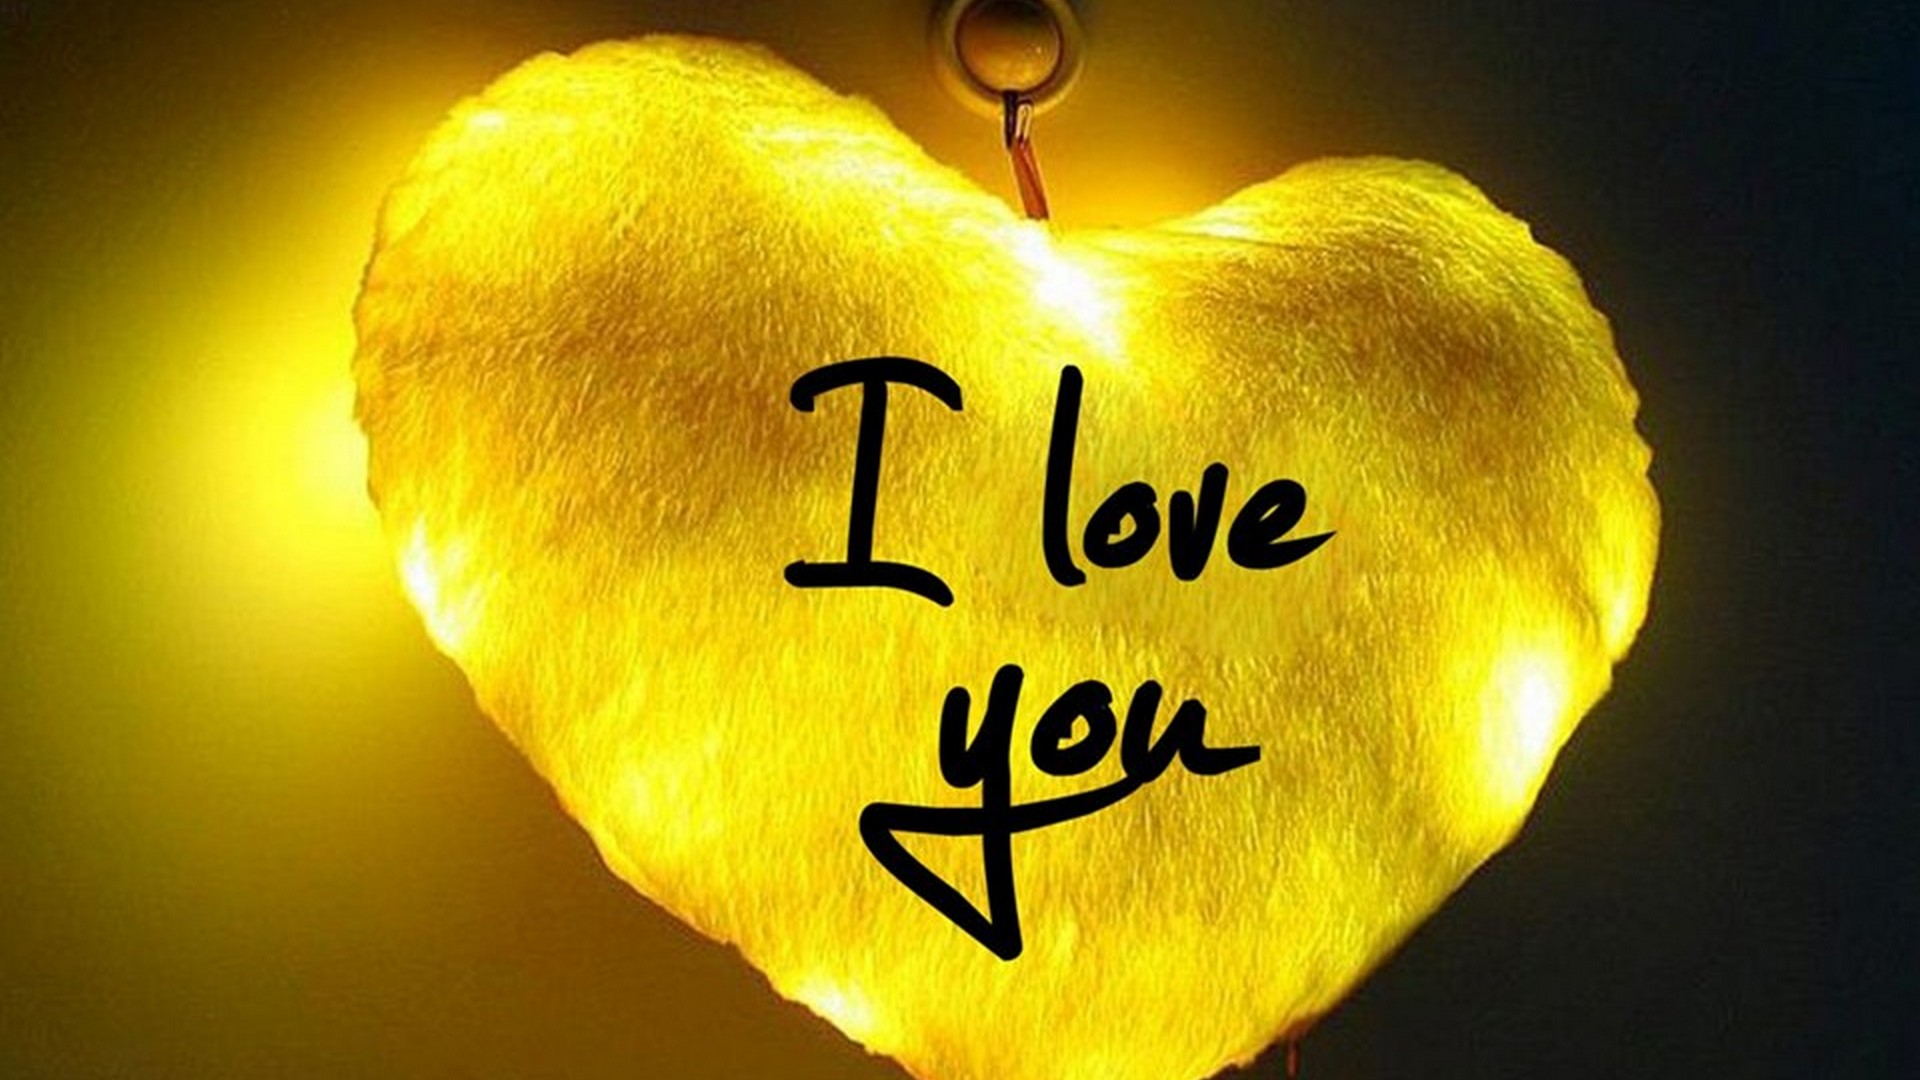 Black And Yellow Desktop Wallpaper With Image Resolution - Hình Nền I Love You - HD Wallpaper 